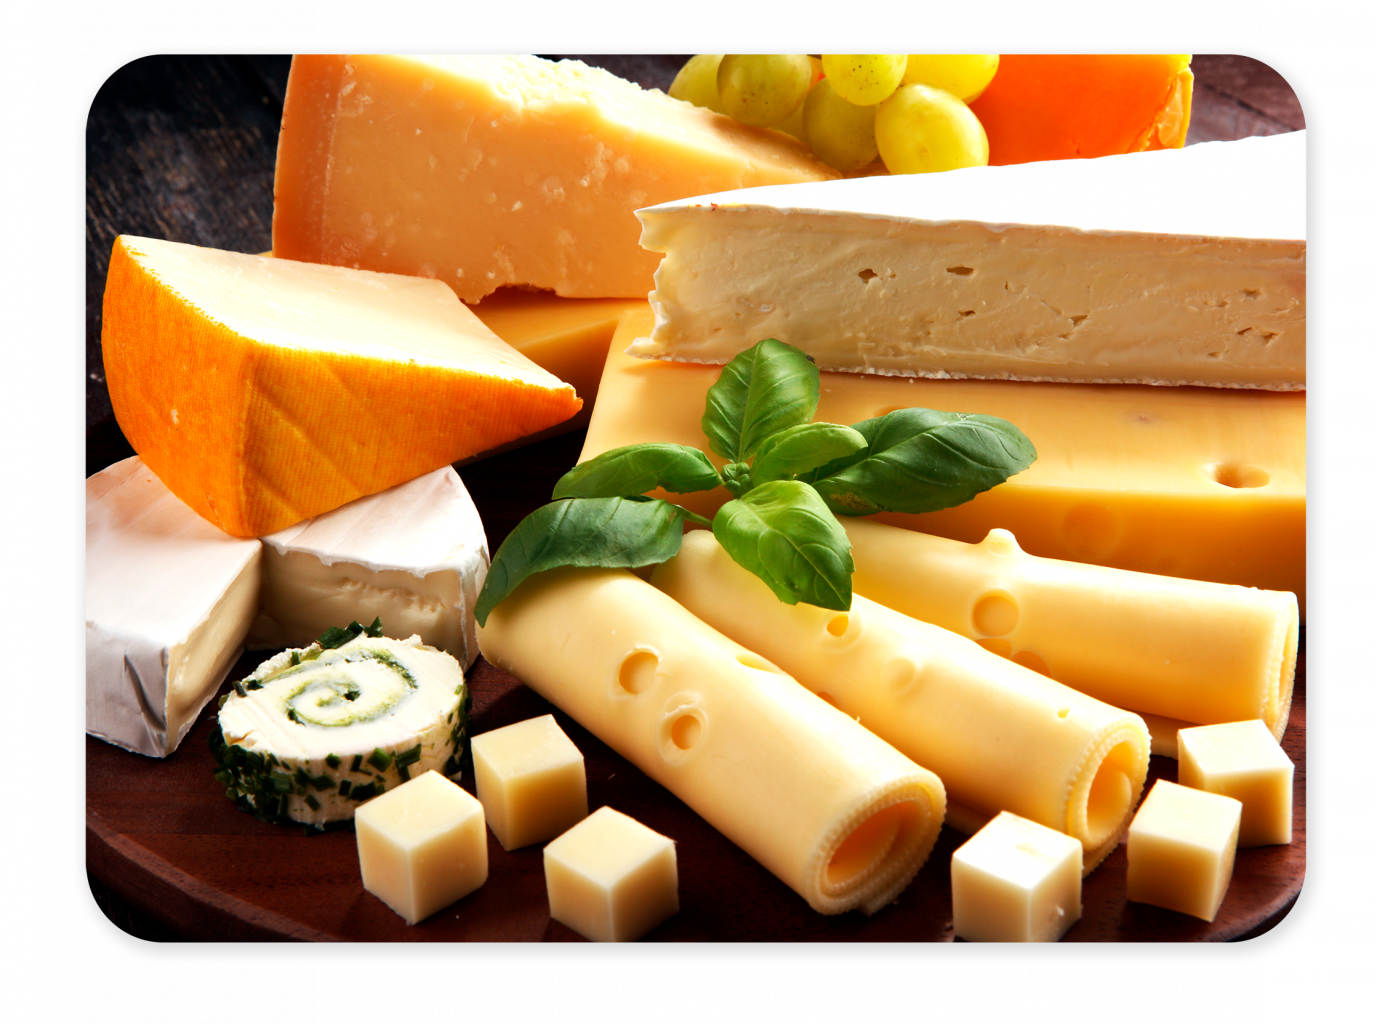 Ingredients for cheeses